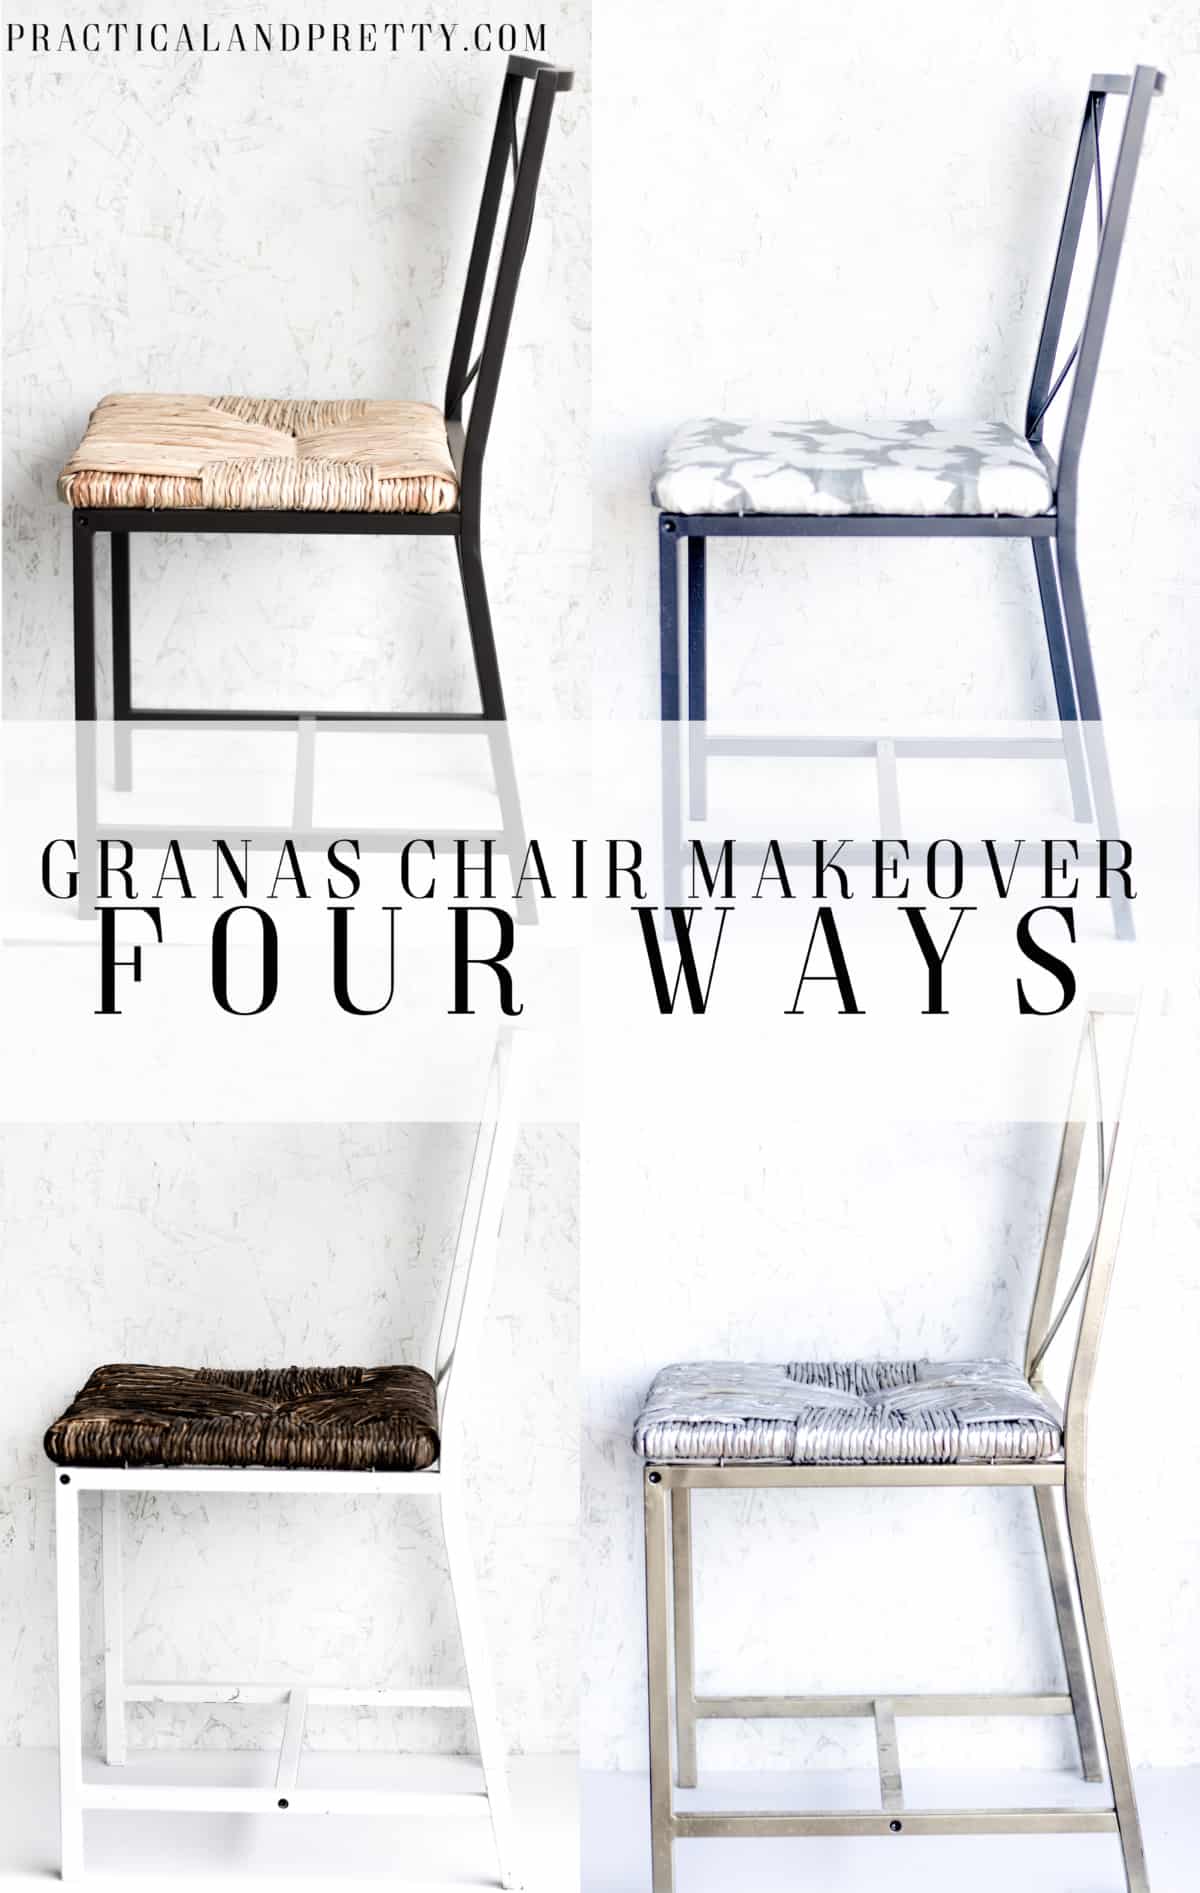 The GRANÅS chair is so customizable. To prove it I made it over 3 different ways. Even the original is cool so I wanted to throw that one in too!